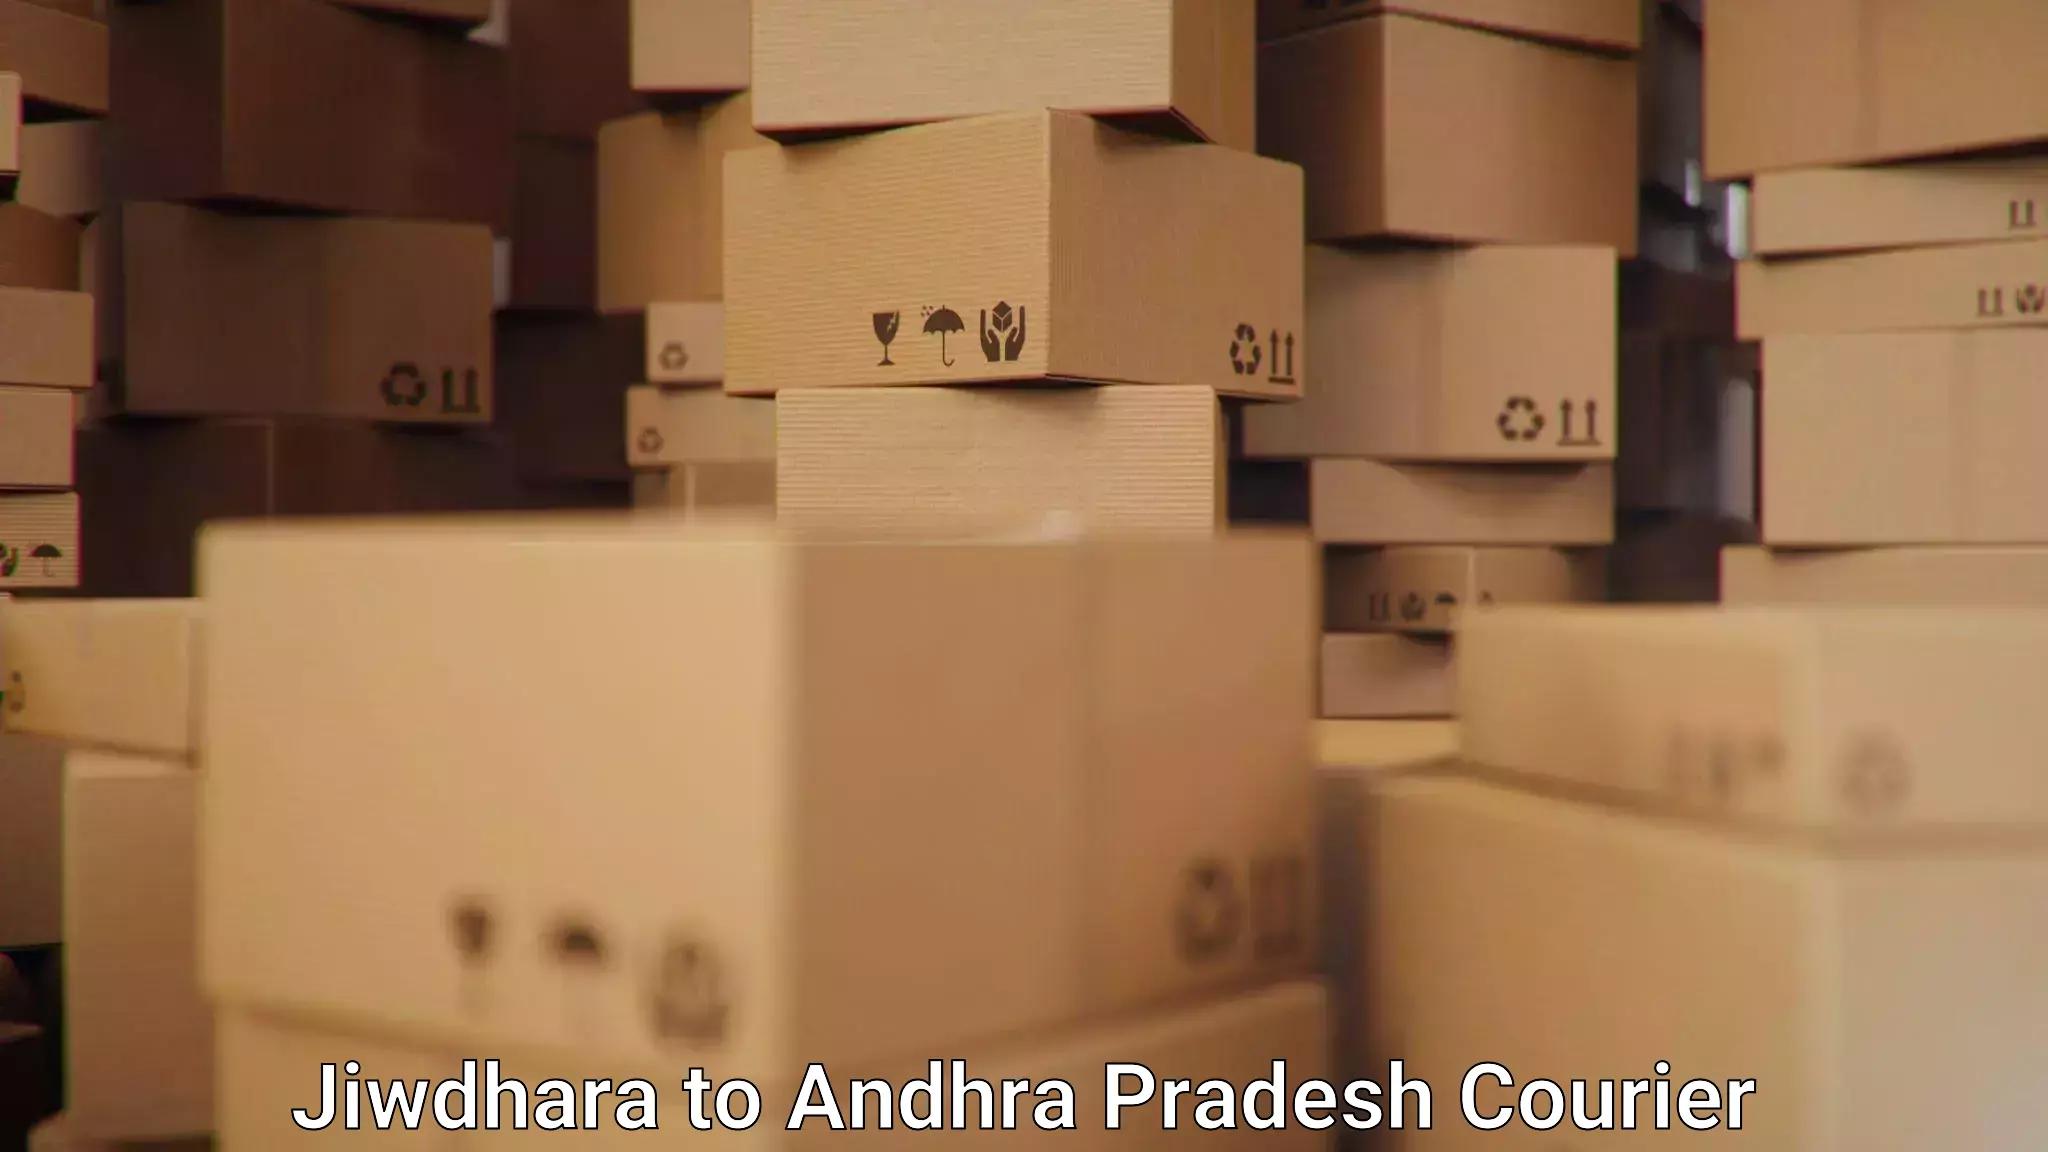 Personal courier services Jiwdhara to Visakhapatnam Port